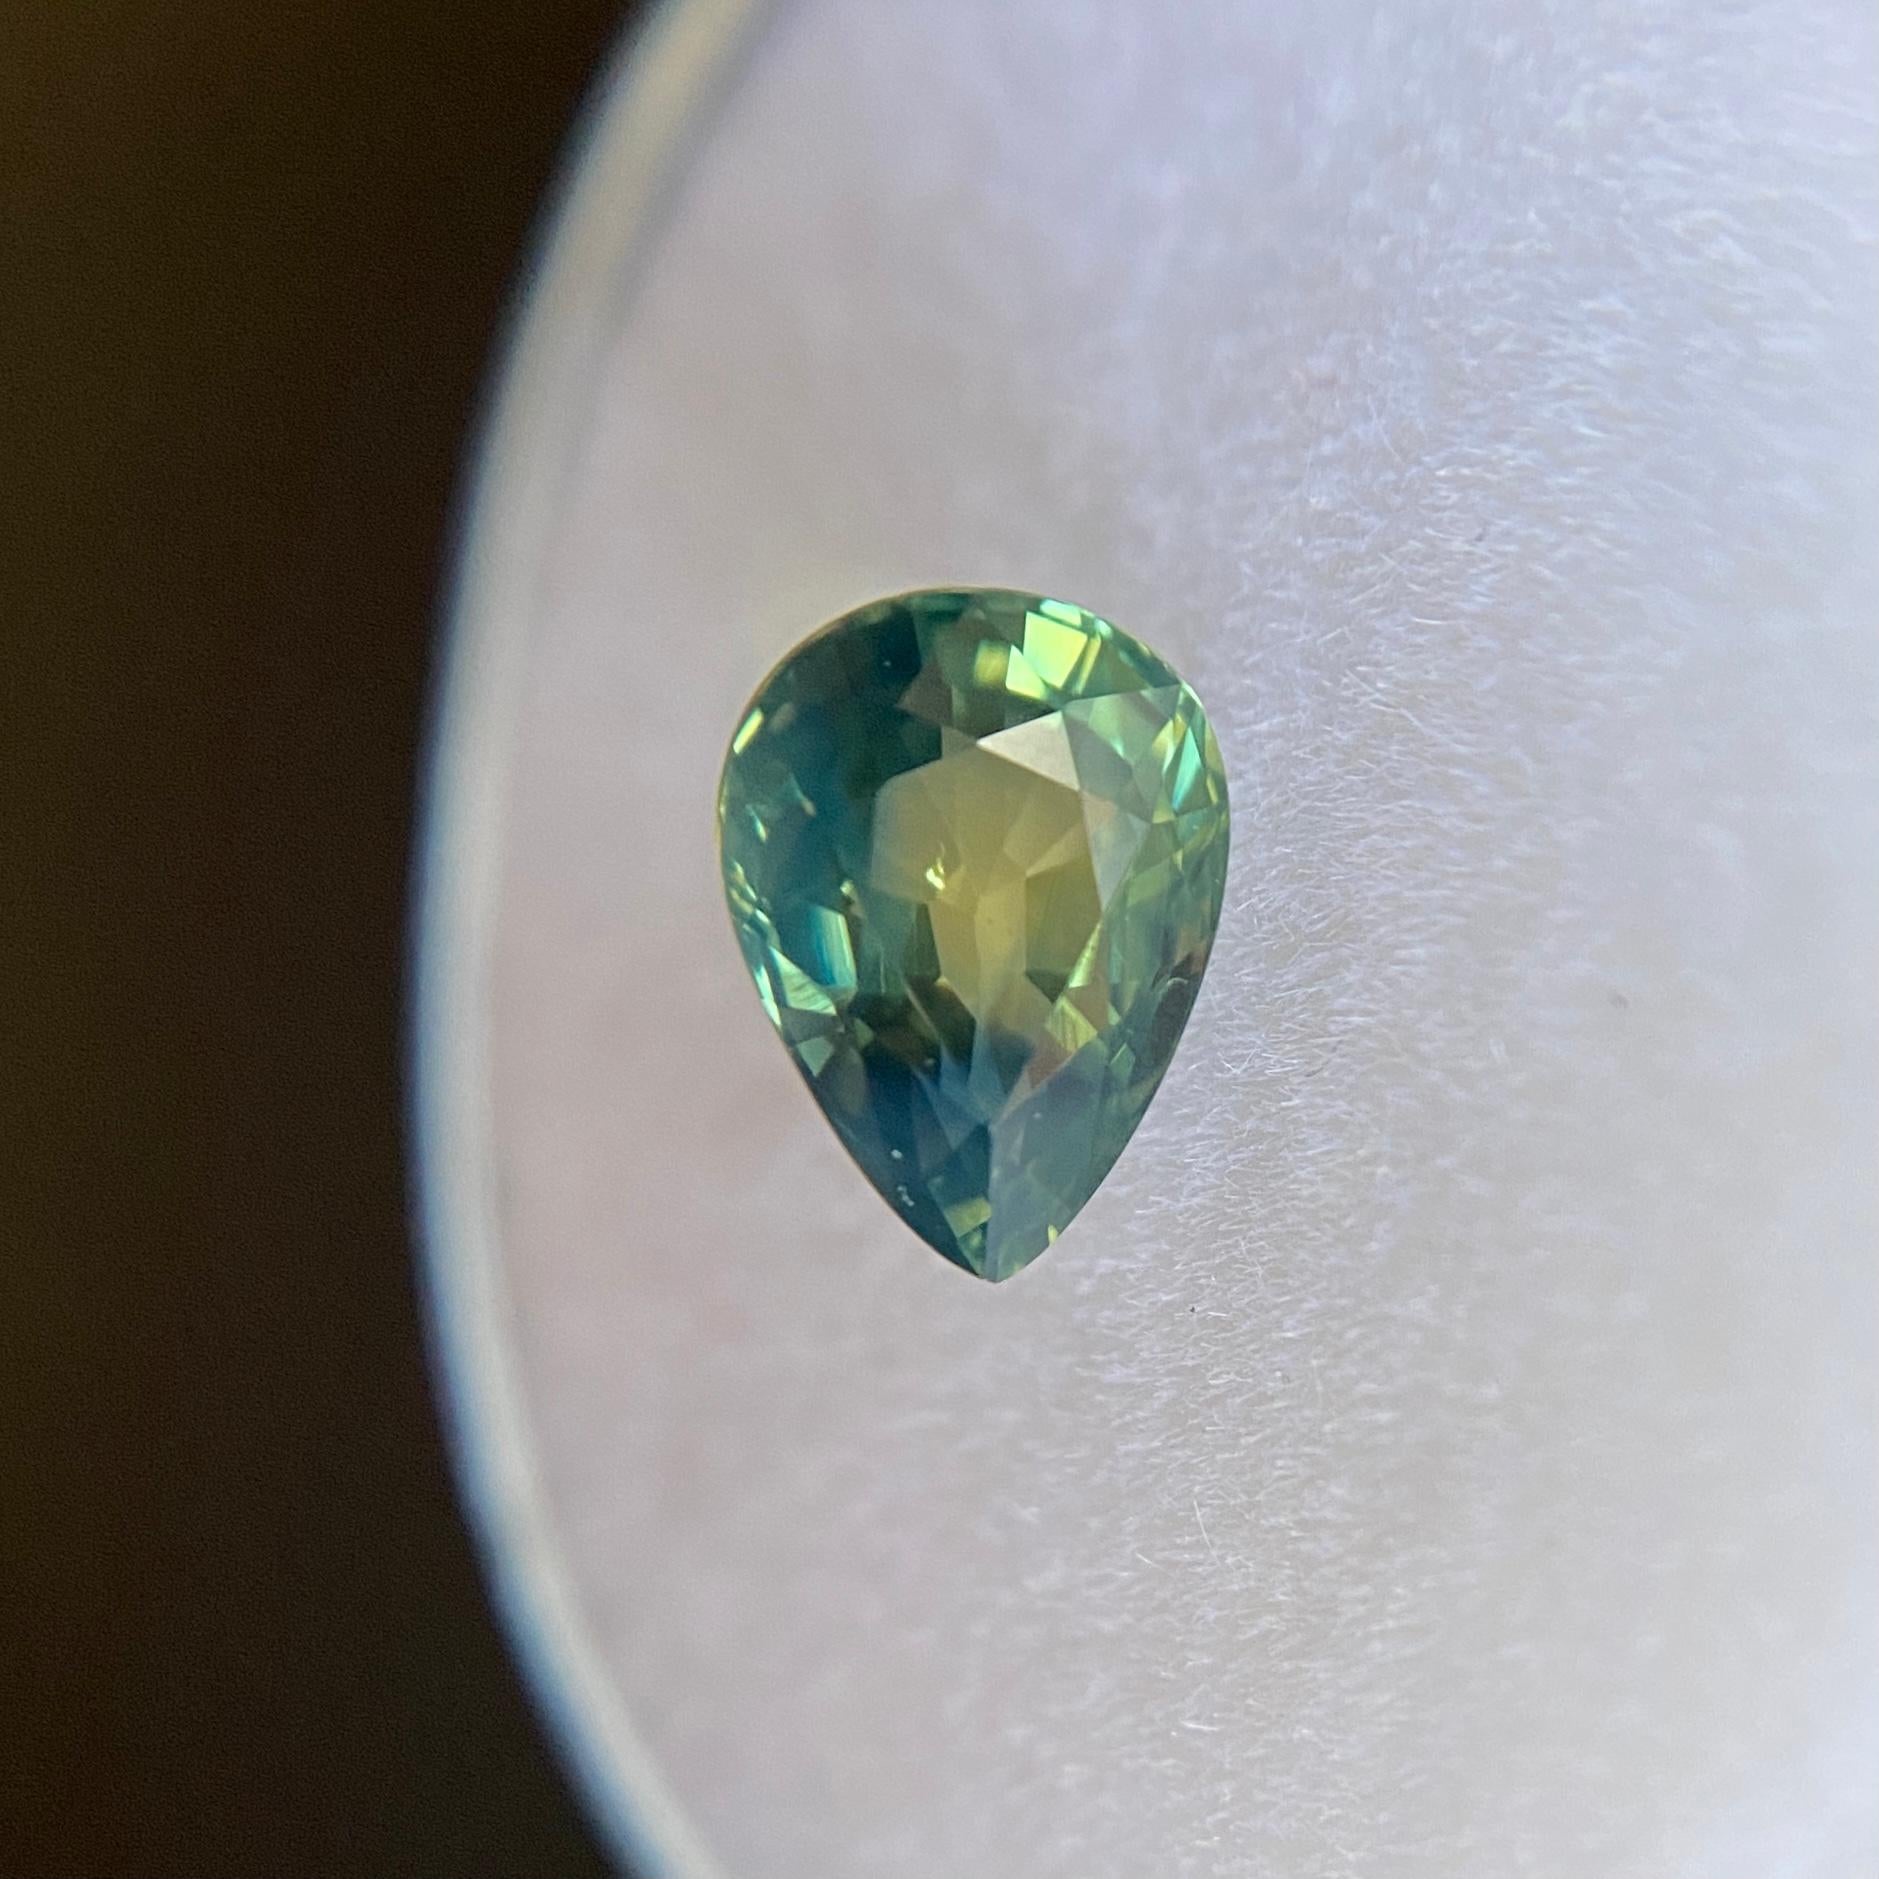 Rare Untreated Australian Parti Colour Sapphire Gemstone.

1.37 Carat unheated sapphire with a rare parti colour effect. Showing blue and yellow green colours with a unique colour split. Very rare and stunning to see.

Fully certified by GIA